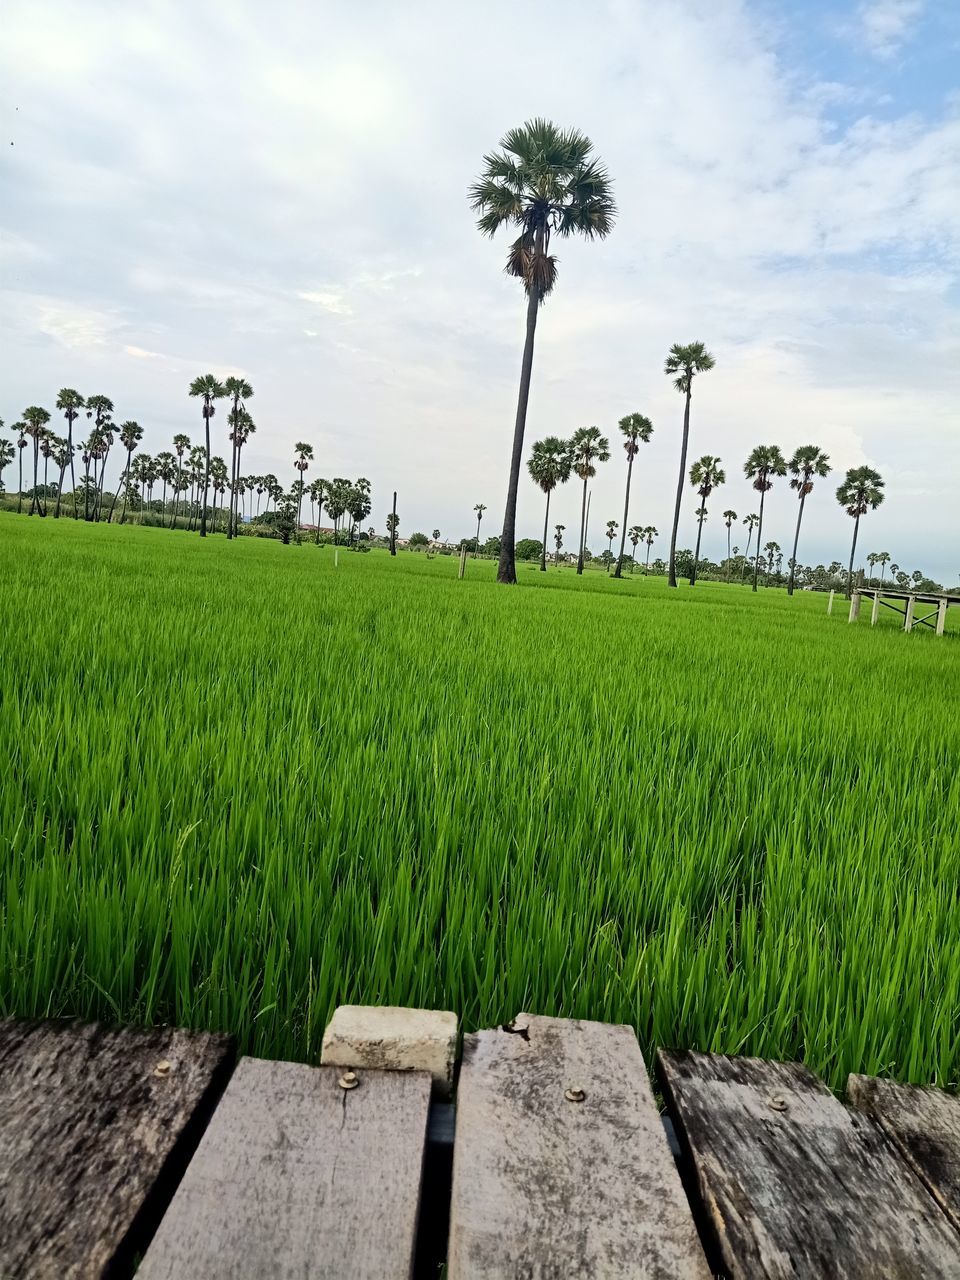 plant, grass, sky, agriculture, field, cloud, nature, landscape, paddy field, green, rural scene, land, environment, rural area, crop, tree, growth, beauty in nature, farm, tropical climate, palm tree, no people, scenics - nature, outdoors, flower, rice paddy, tranquility, food and drink, day, environmental conservation, cereal plant, food, rice, wood, tranquil scene, soil, horizon